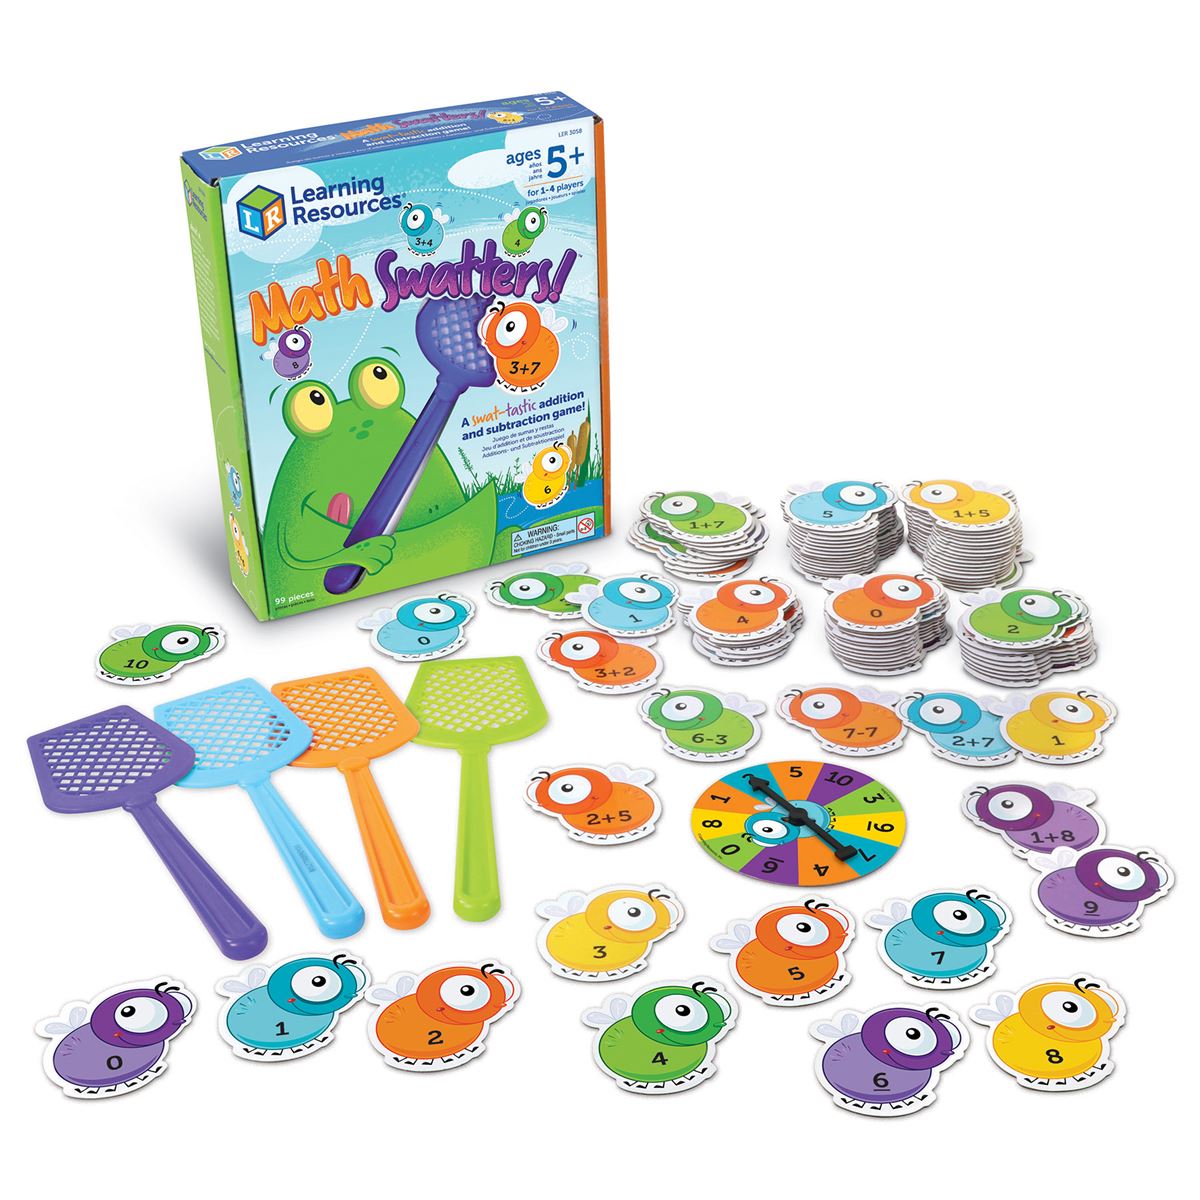 Picture of Learning Resources LER3058 Mathswatters Addition & Subtraction Game - Small